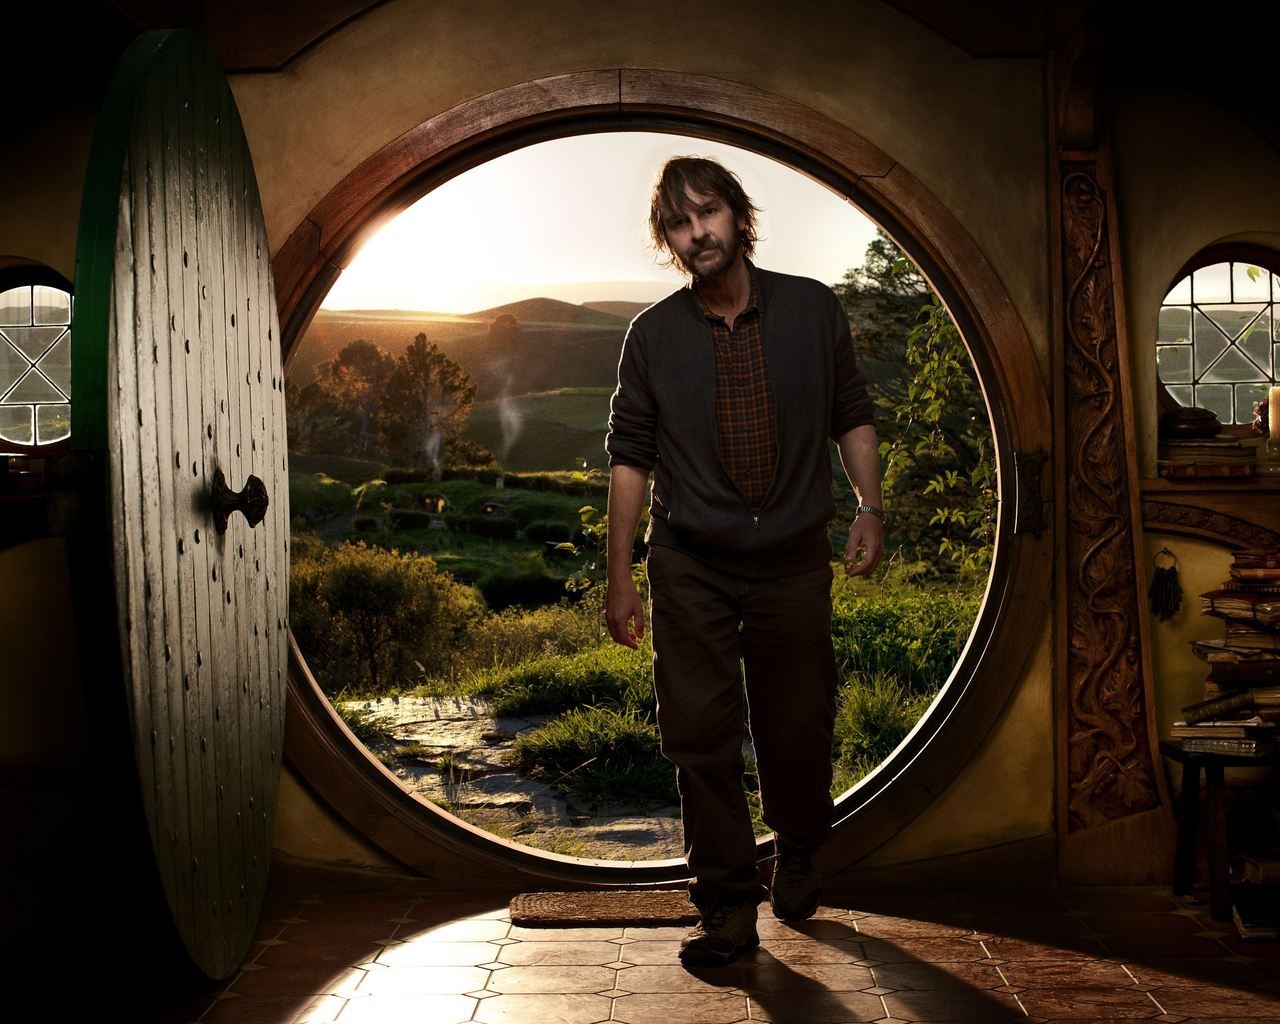 Peter Jackson for 1280 x 1024 resolution